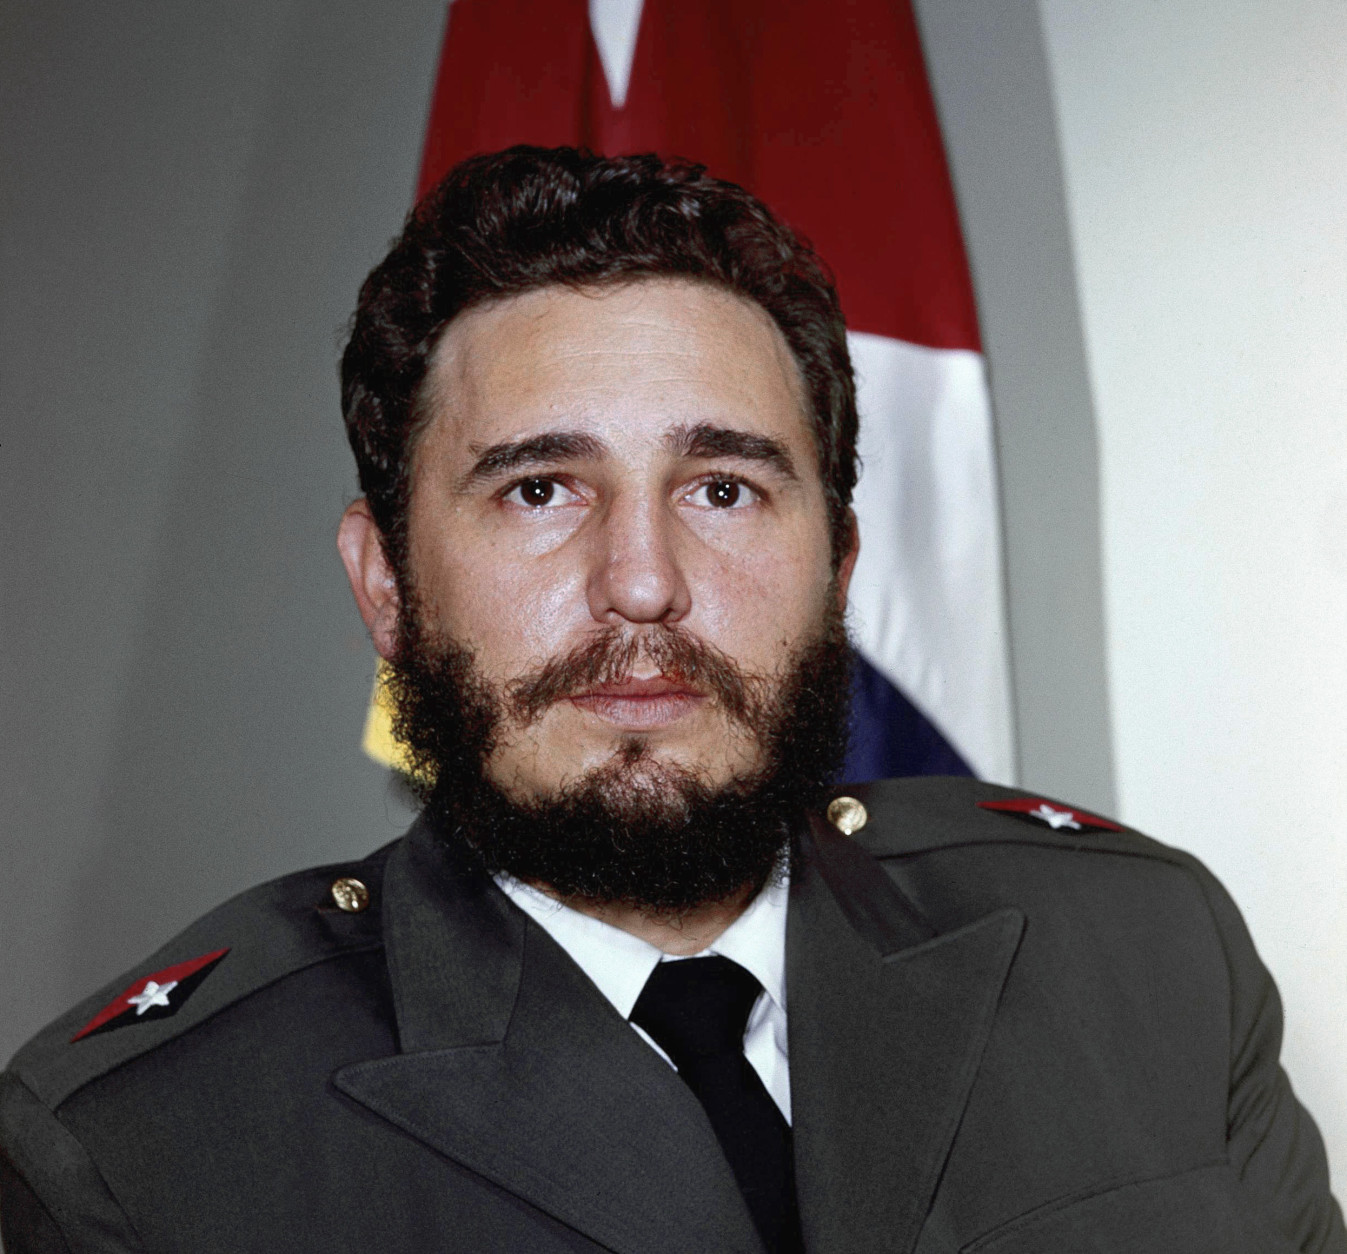 Fidel Castro shown in 1959.     No other identification given. (AP Photo)